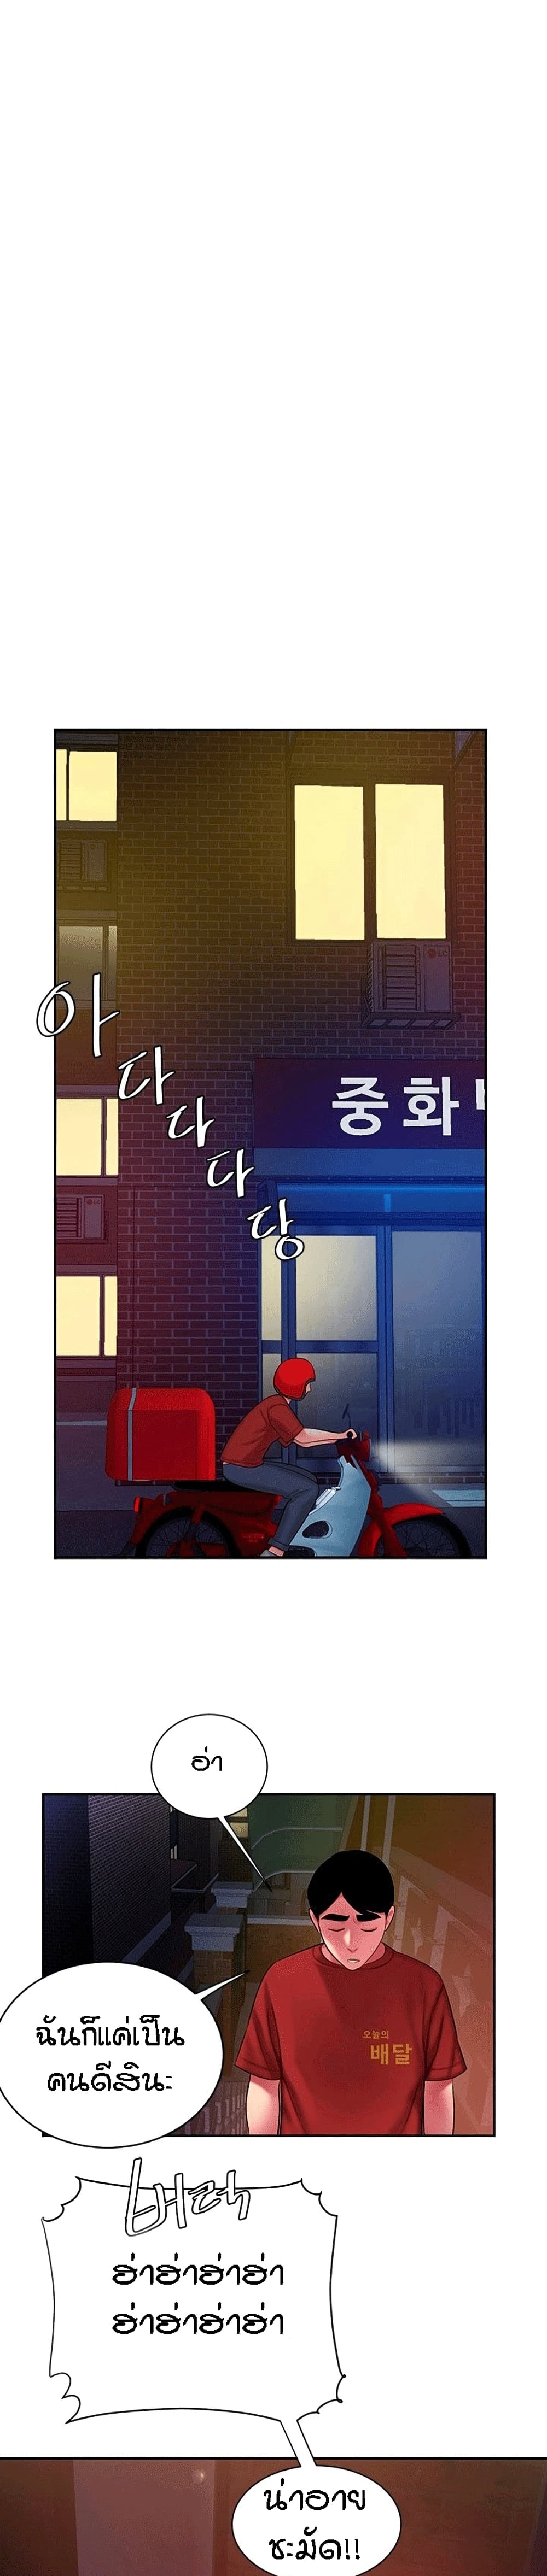 Delivery Man 38-38